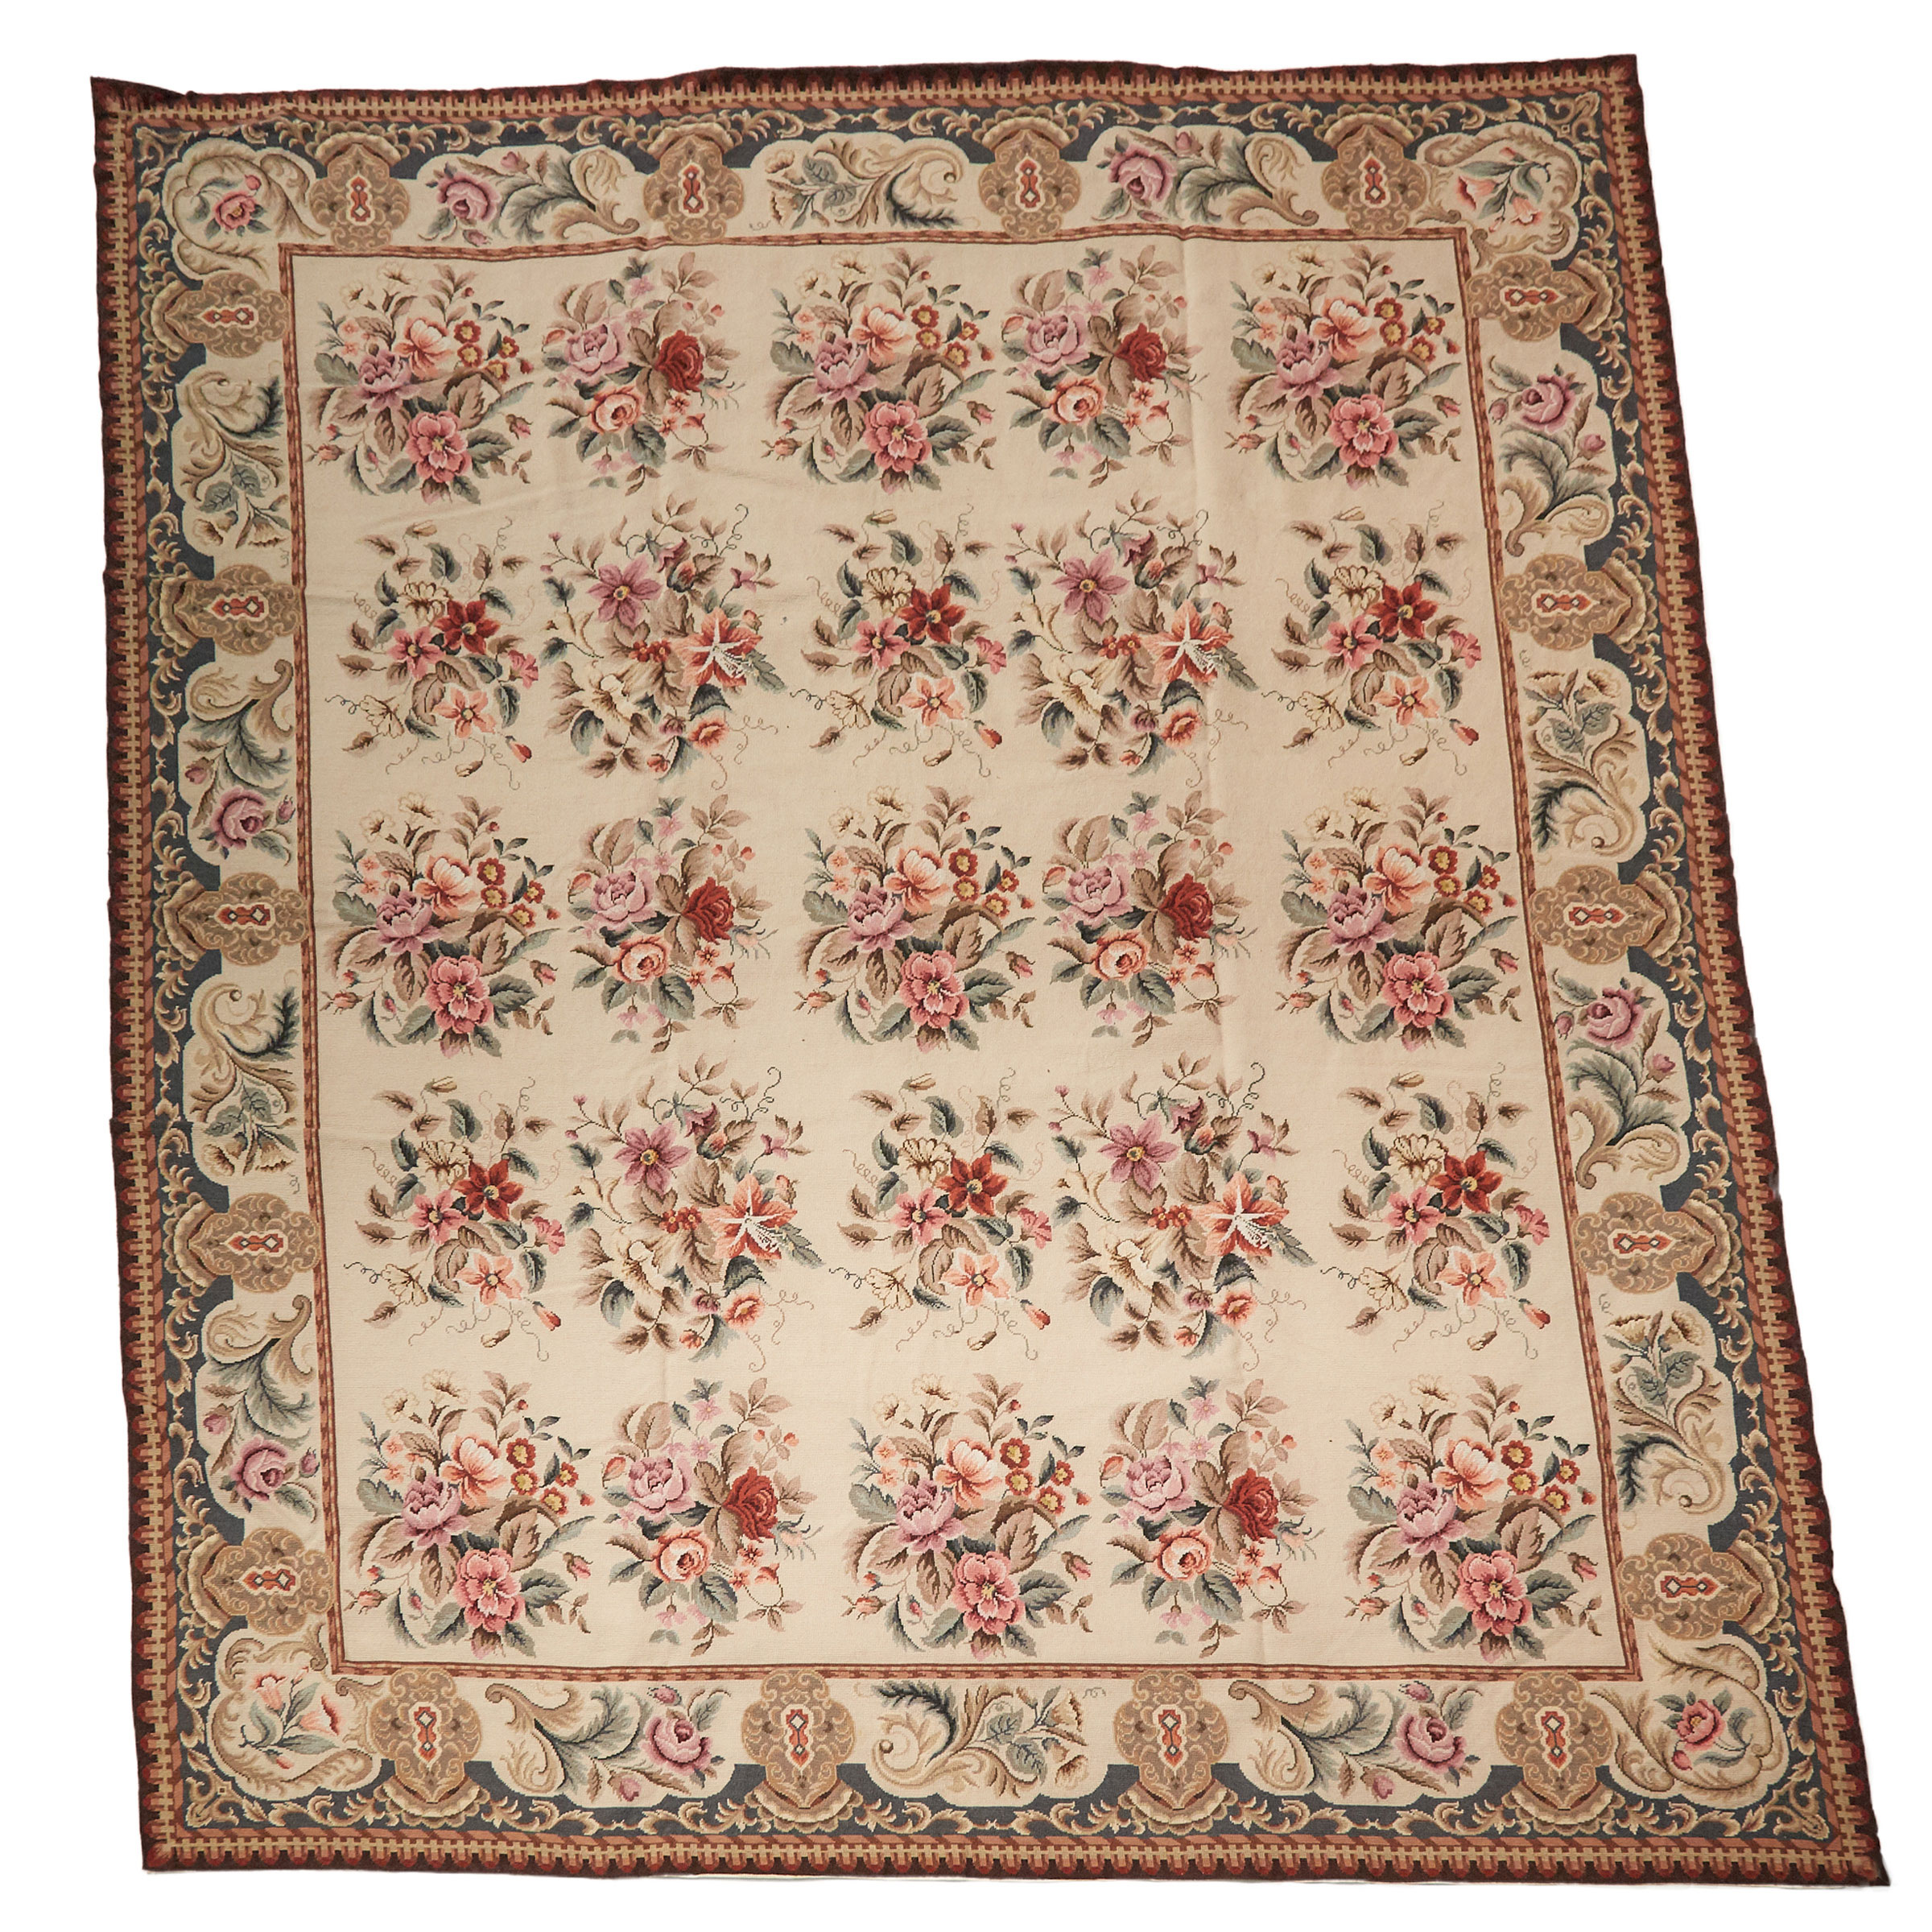 Aubusson Style Needlepoint Carpet, mid to late 20th century